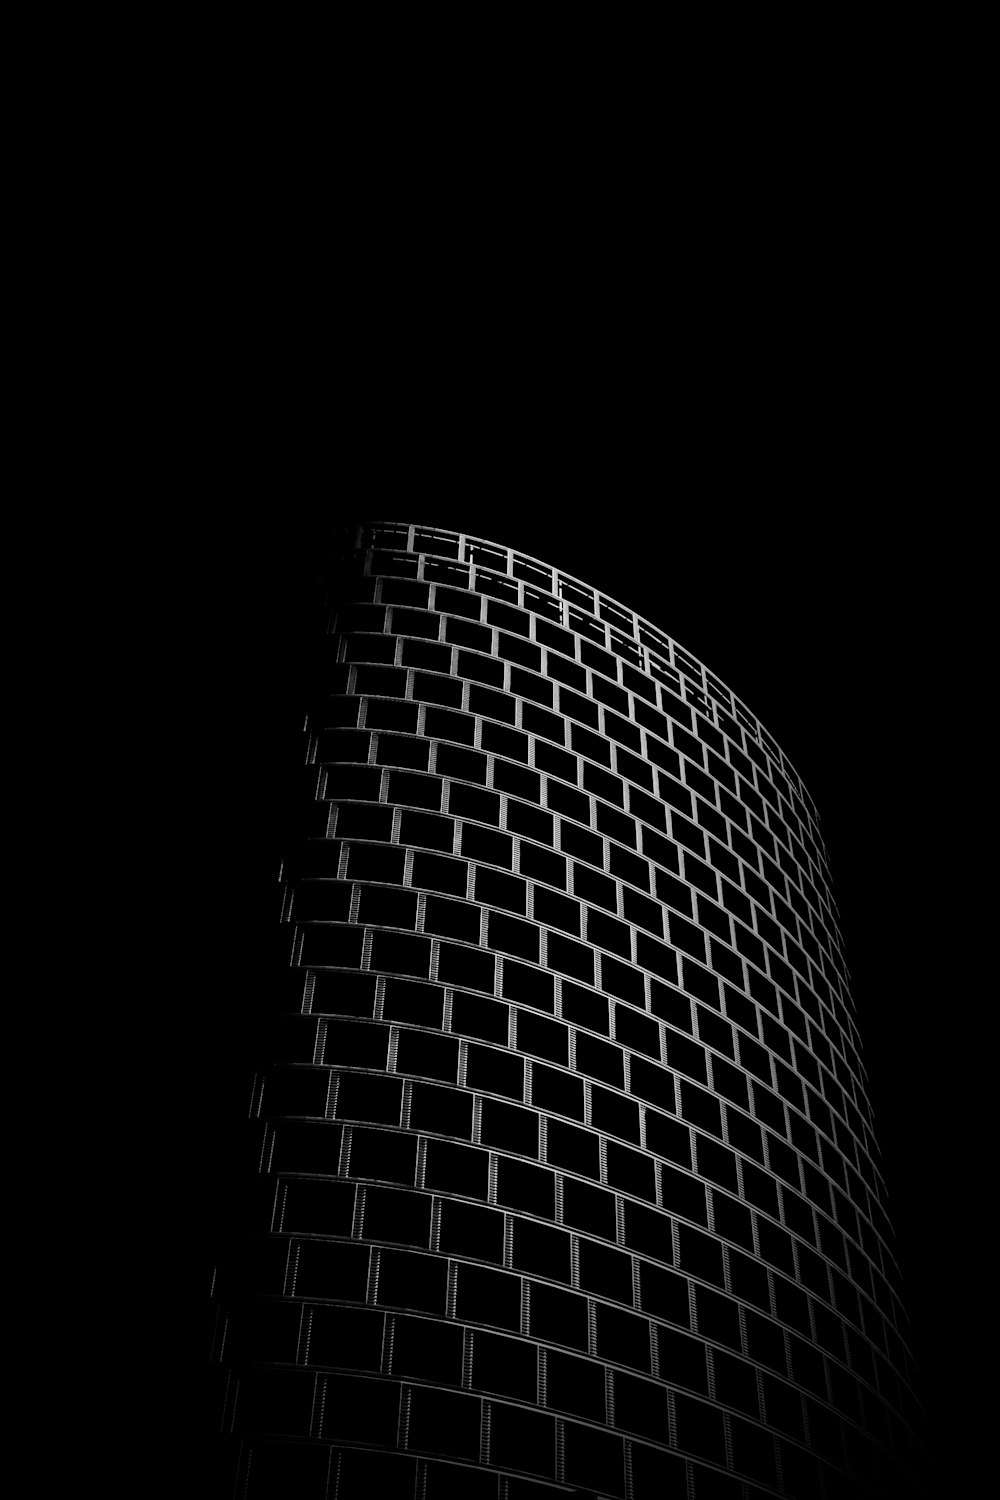 Amoled Wallpapers Free Download 100 Best Free Wallpaper Black And White Black And Dark Photos On Unsplash